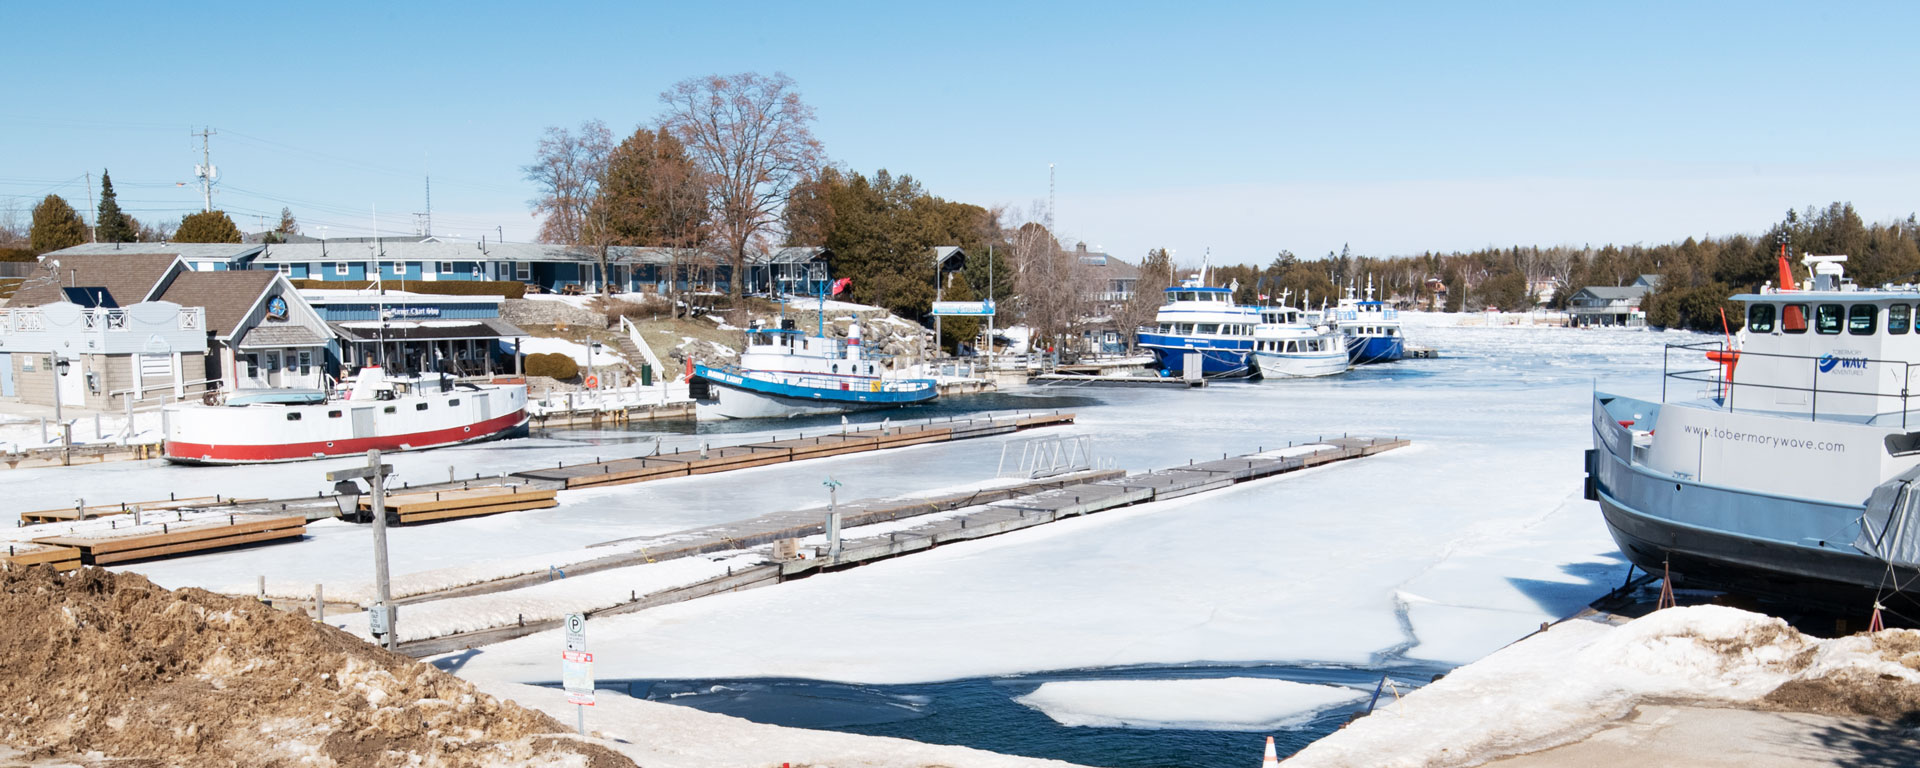 Wide shot of the marina in tobermory town. The lake is frozen over and the tree's are bare